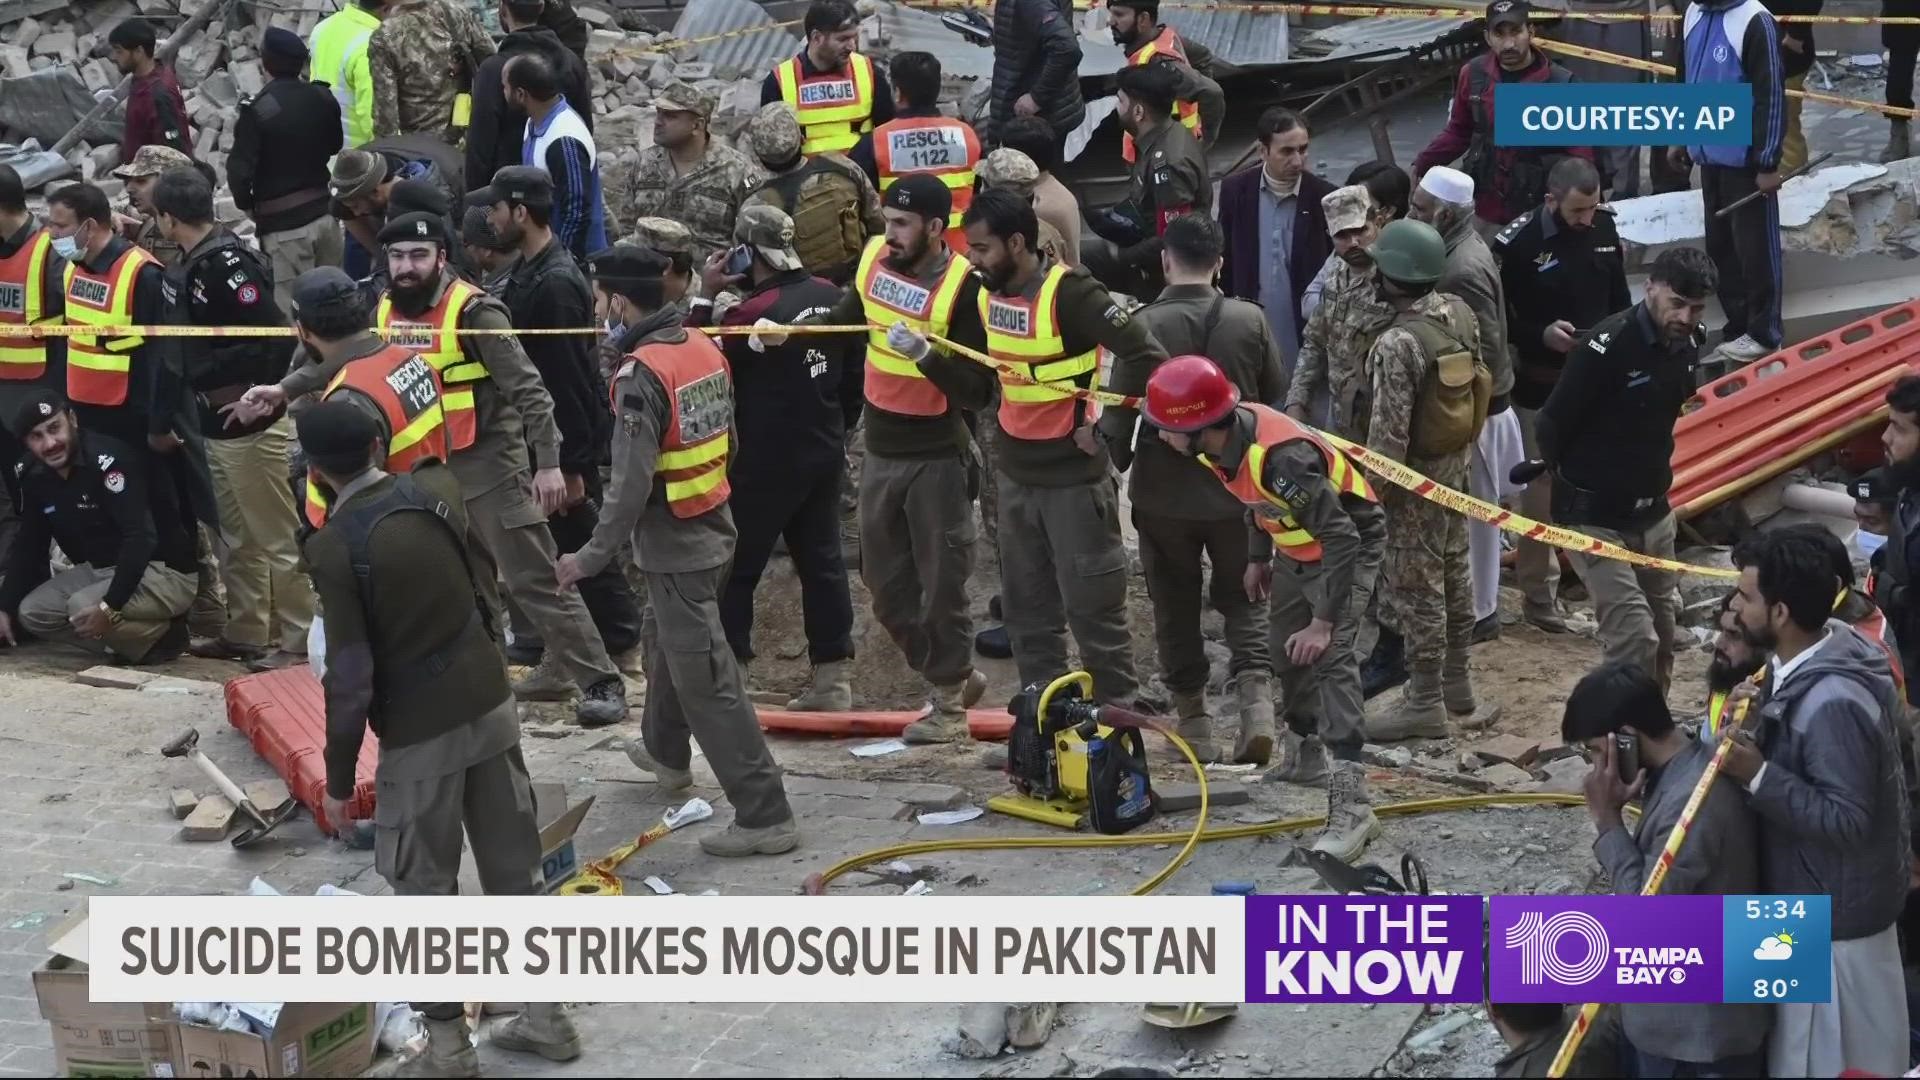 Pakistan has seen a surge in militant attacks since November, when the Pakistani Taliban ended their cease-fire with government forces.